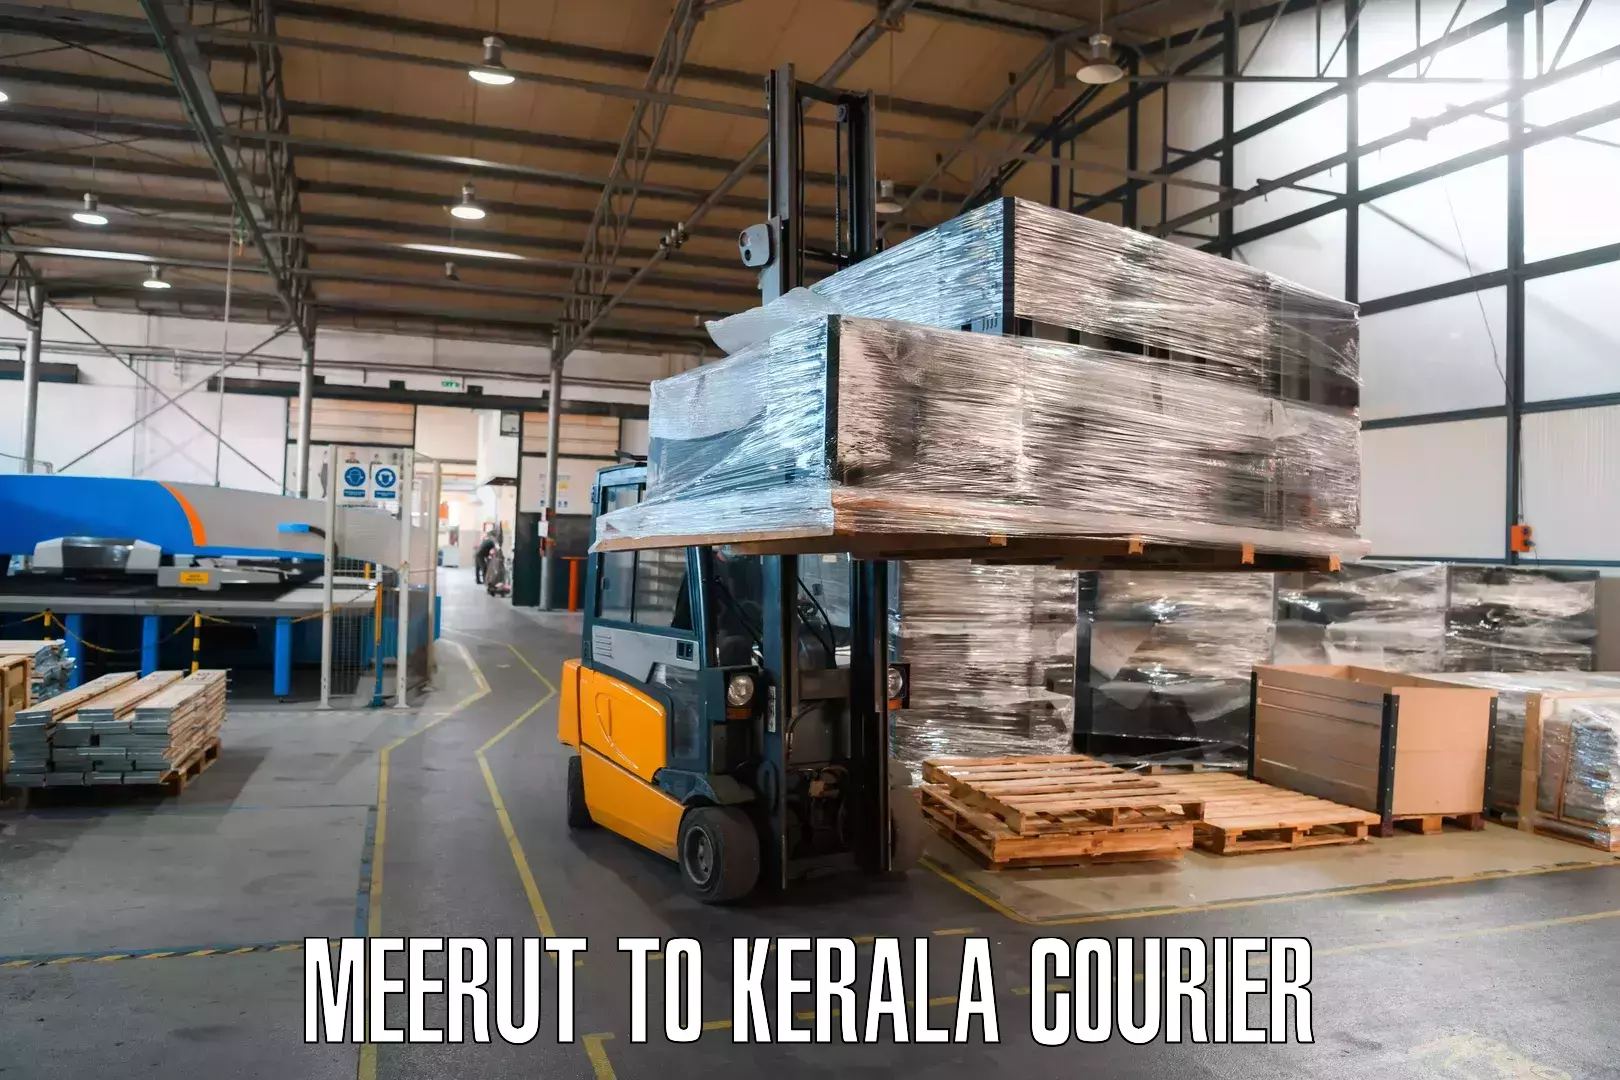 Subscription-based courier Meerut to Kerala